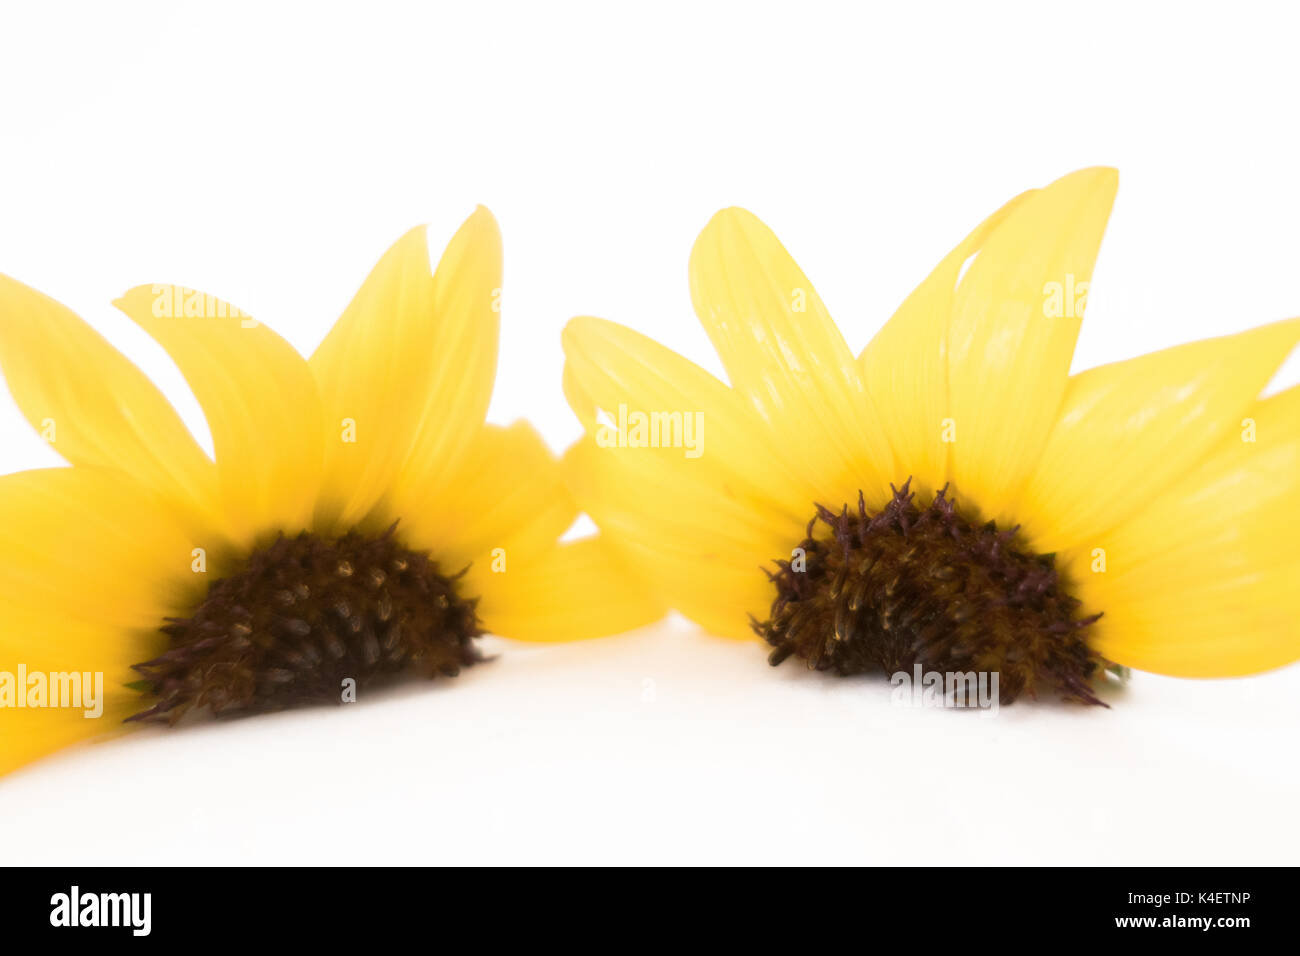 Two sunflowers halves on a white background. Stock Photo